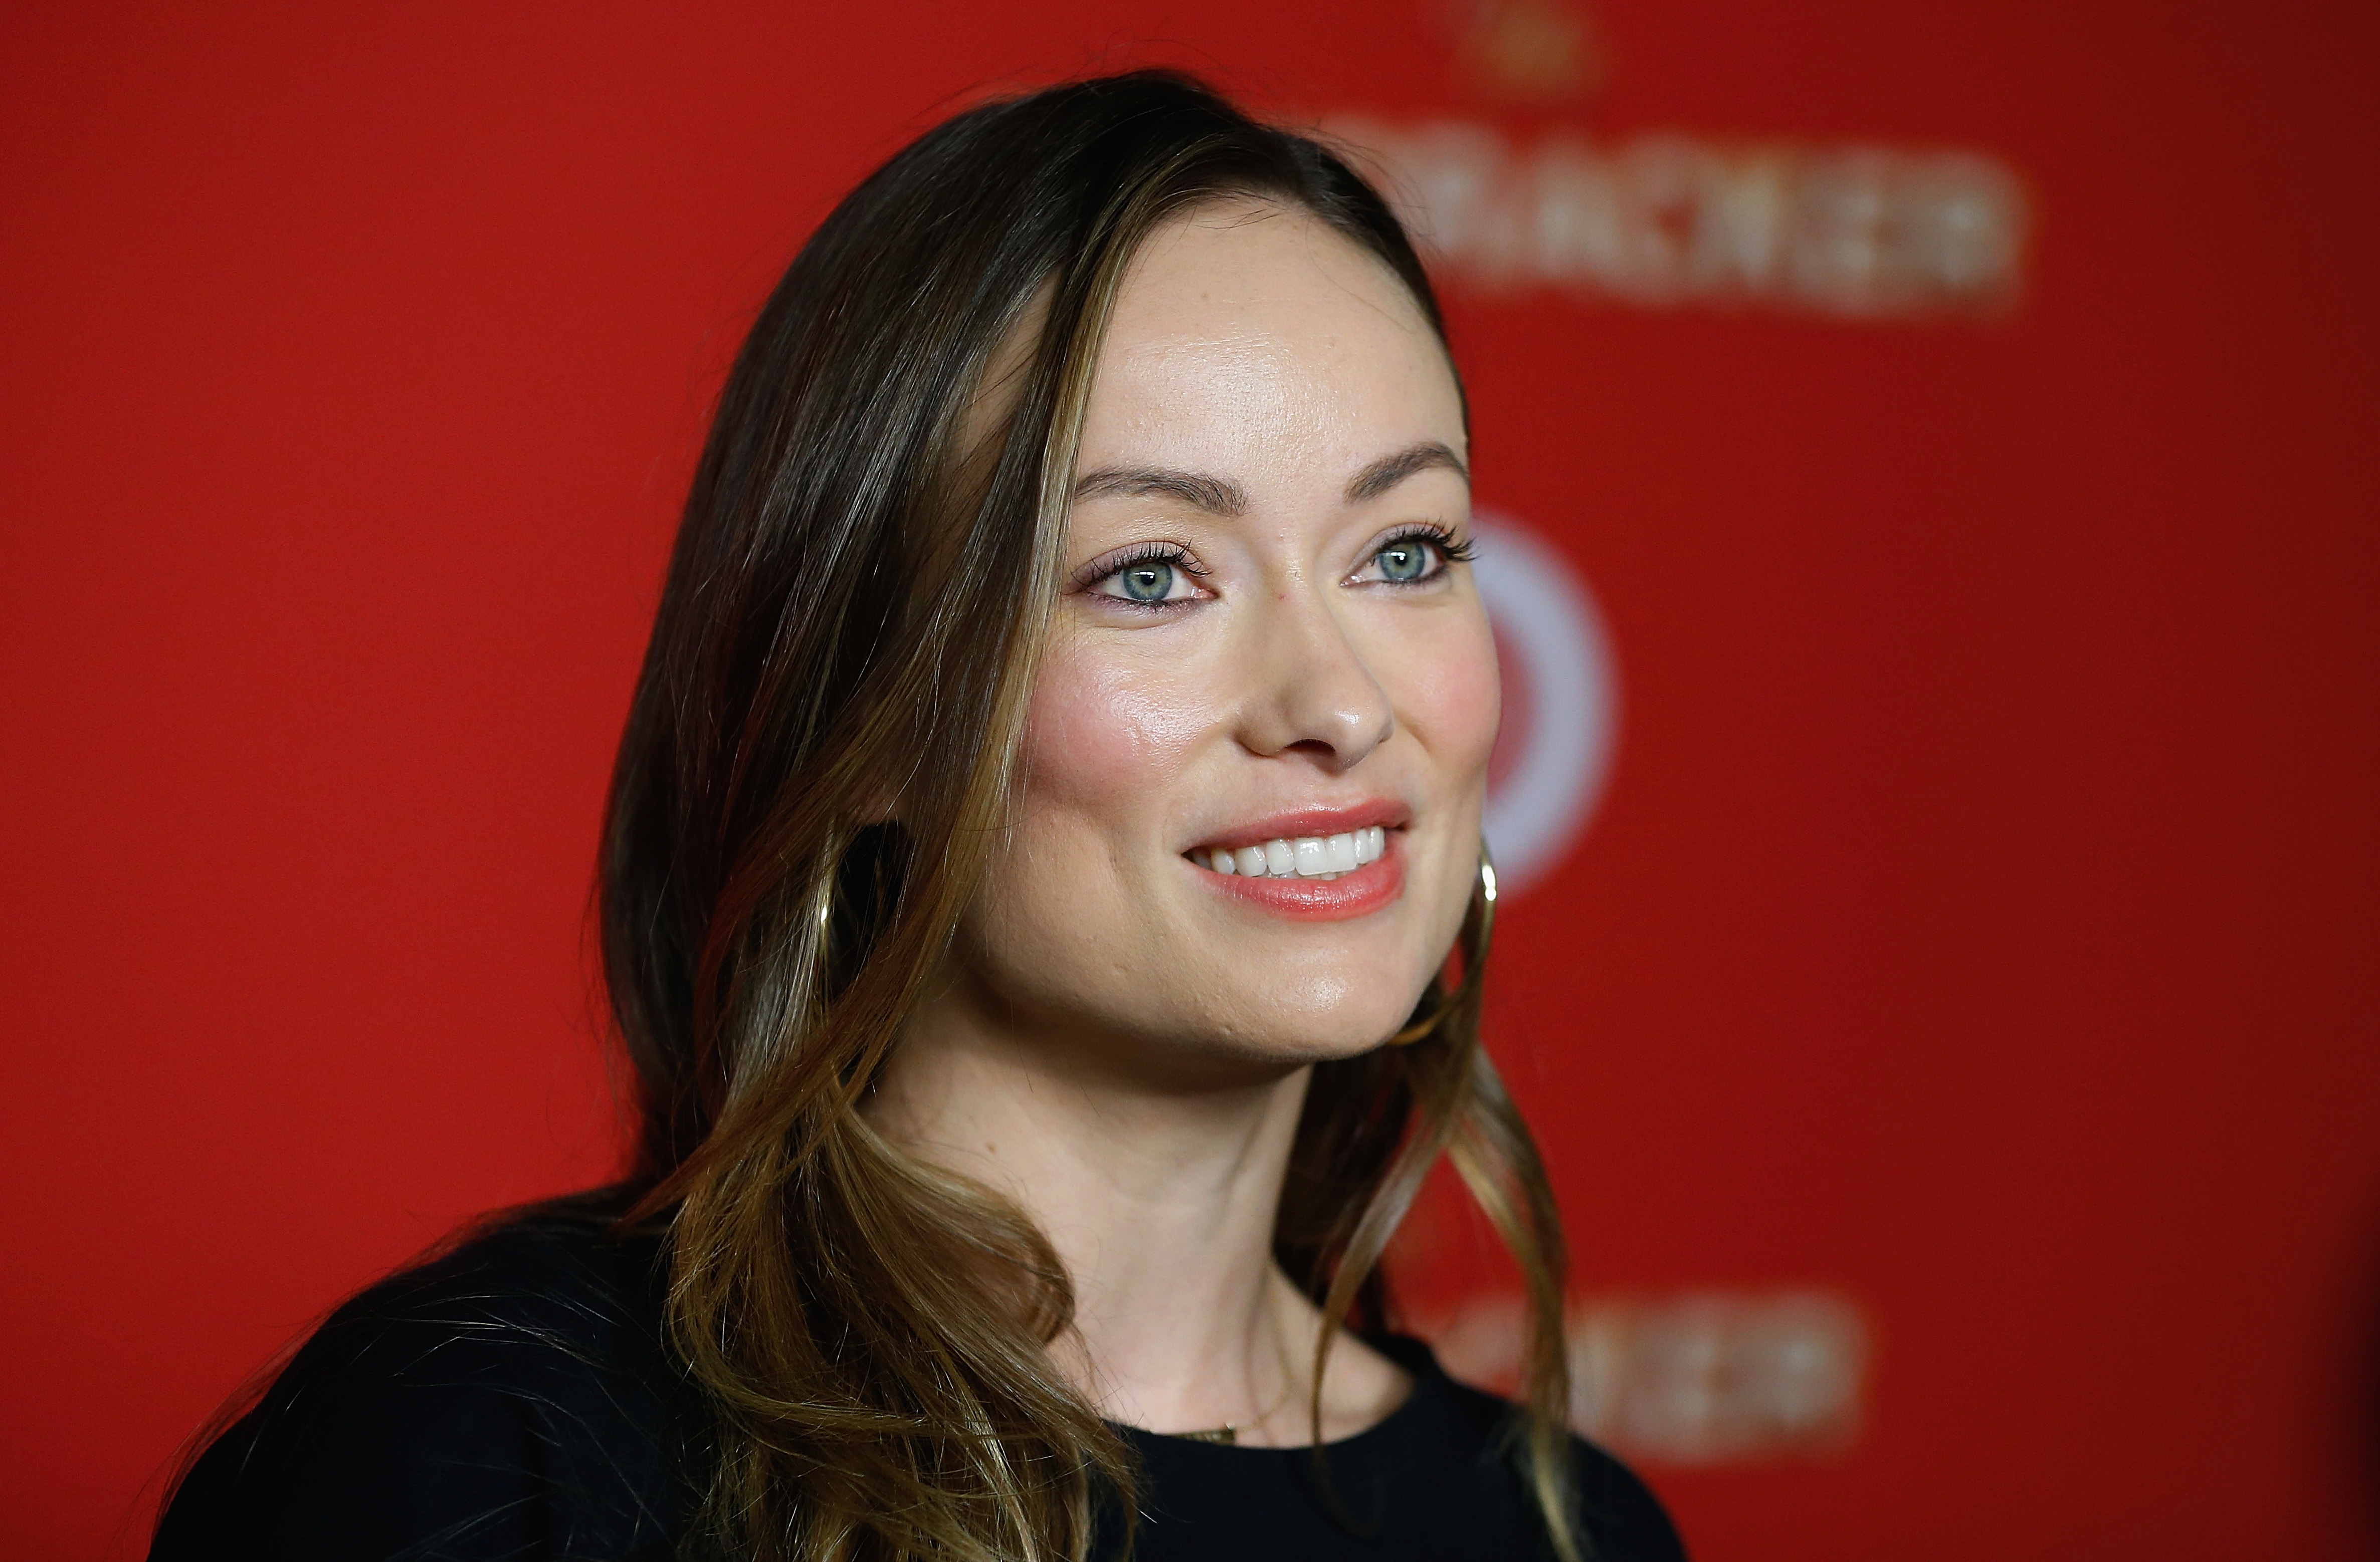 NEW YORK, NY - DECEMBER 07:  Olivia Wilde attends Target's Toycracker Premiere event at Spring Studios on December 7, 2016 in New York City.  (Photo by John Lamparski/WireImage) (John Lamparski—WireImage)